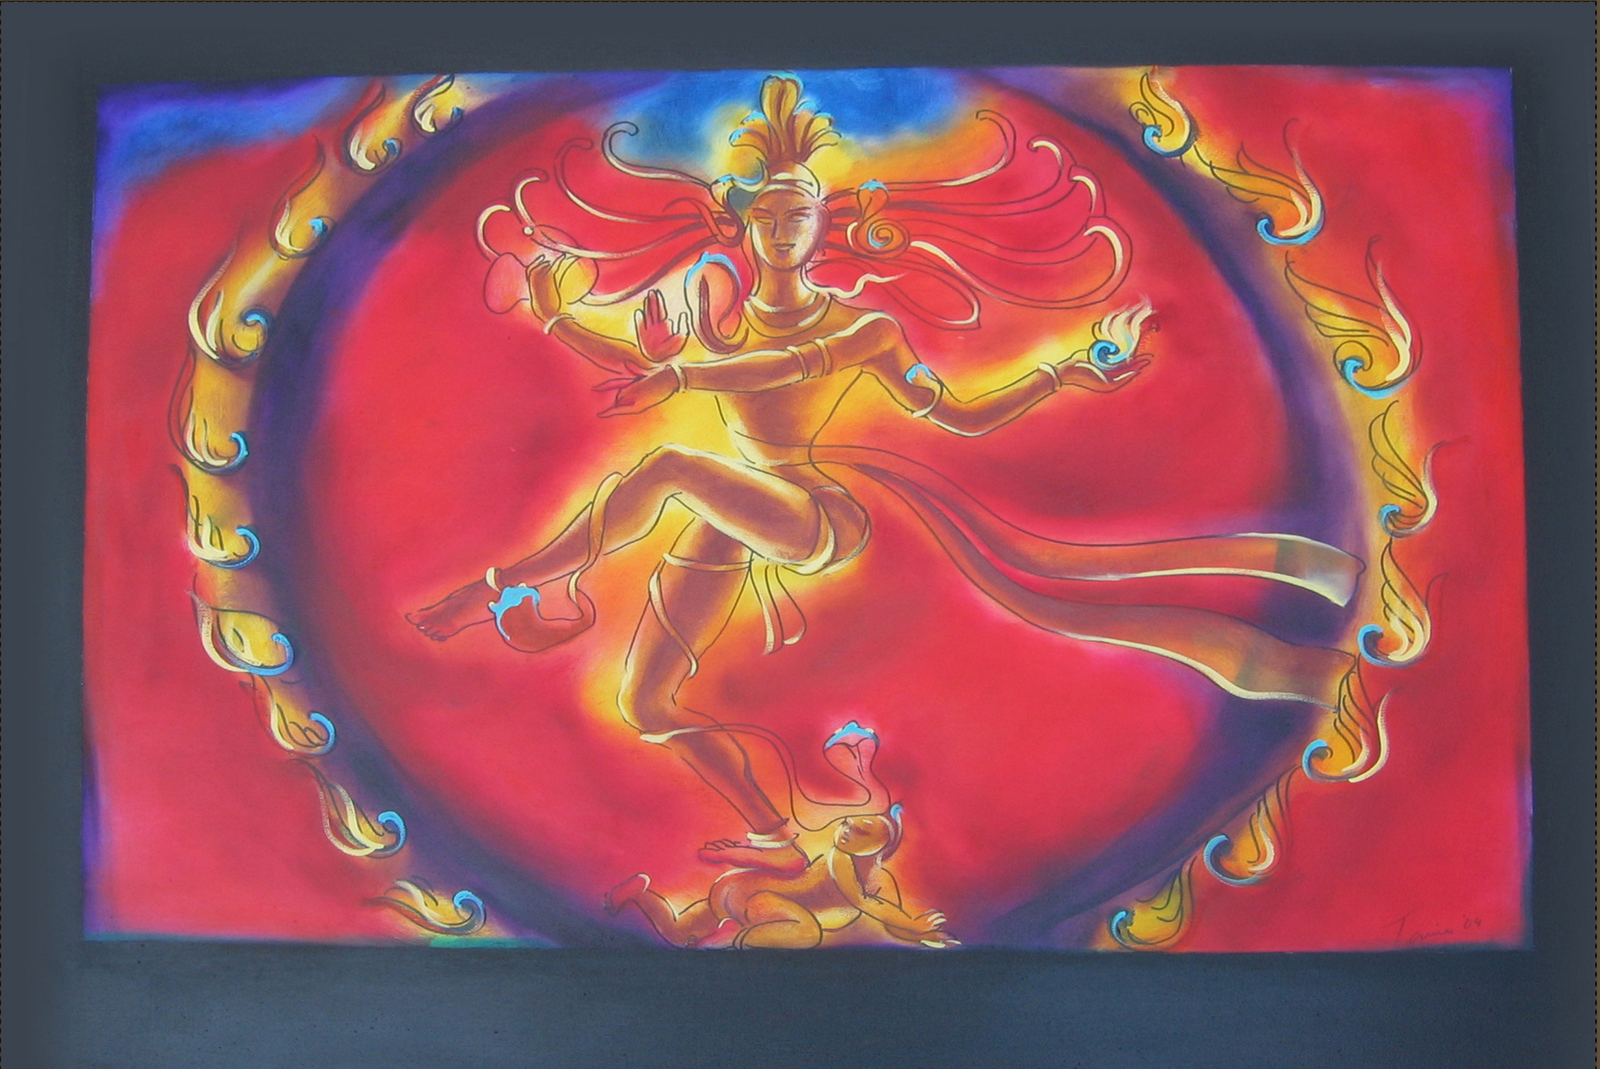 Cosmic Dance, oil on canvas, 36x42 inches